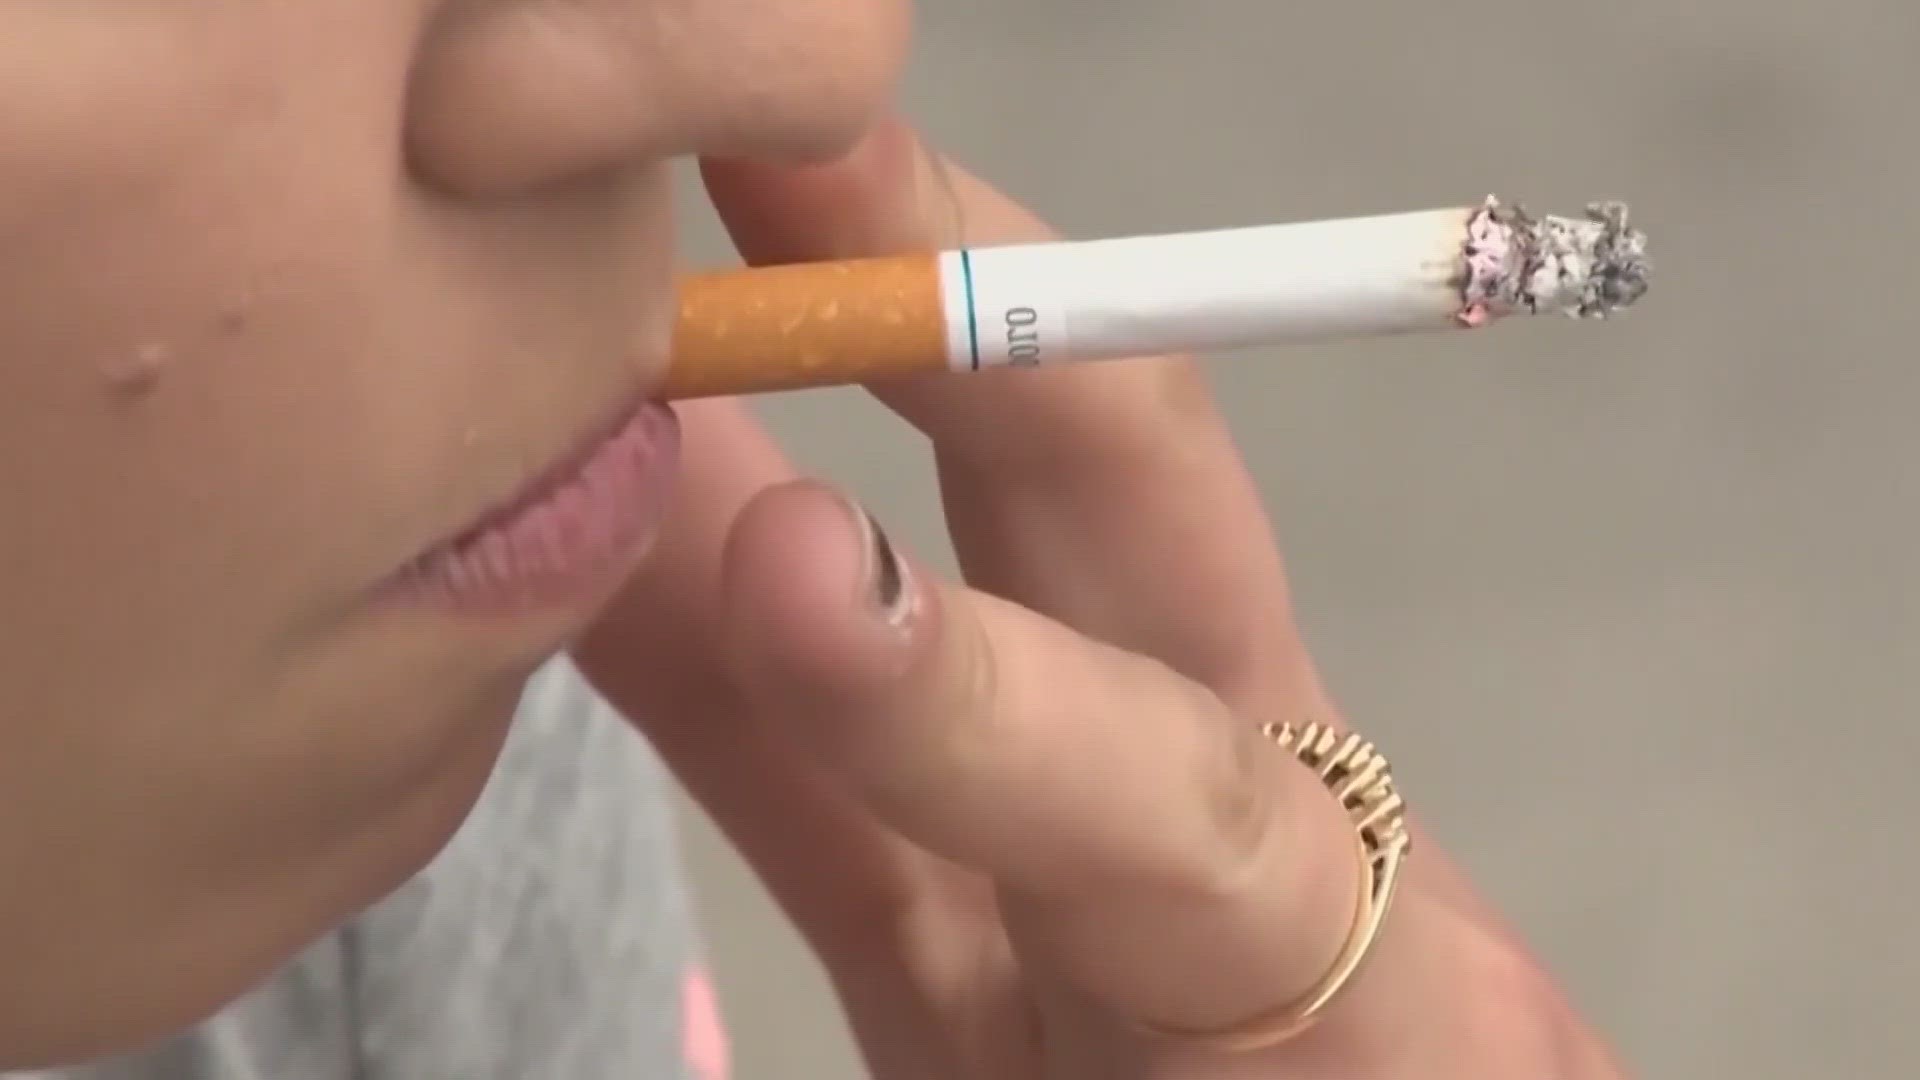 World No Tobacco Day is Wednesday. 
The Louisiana Campaign for Tobacco-Free Living will host events across the state for World No Tobacco Day.